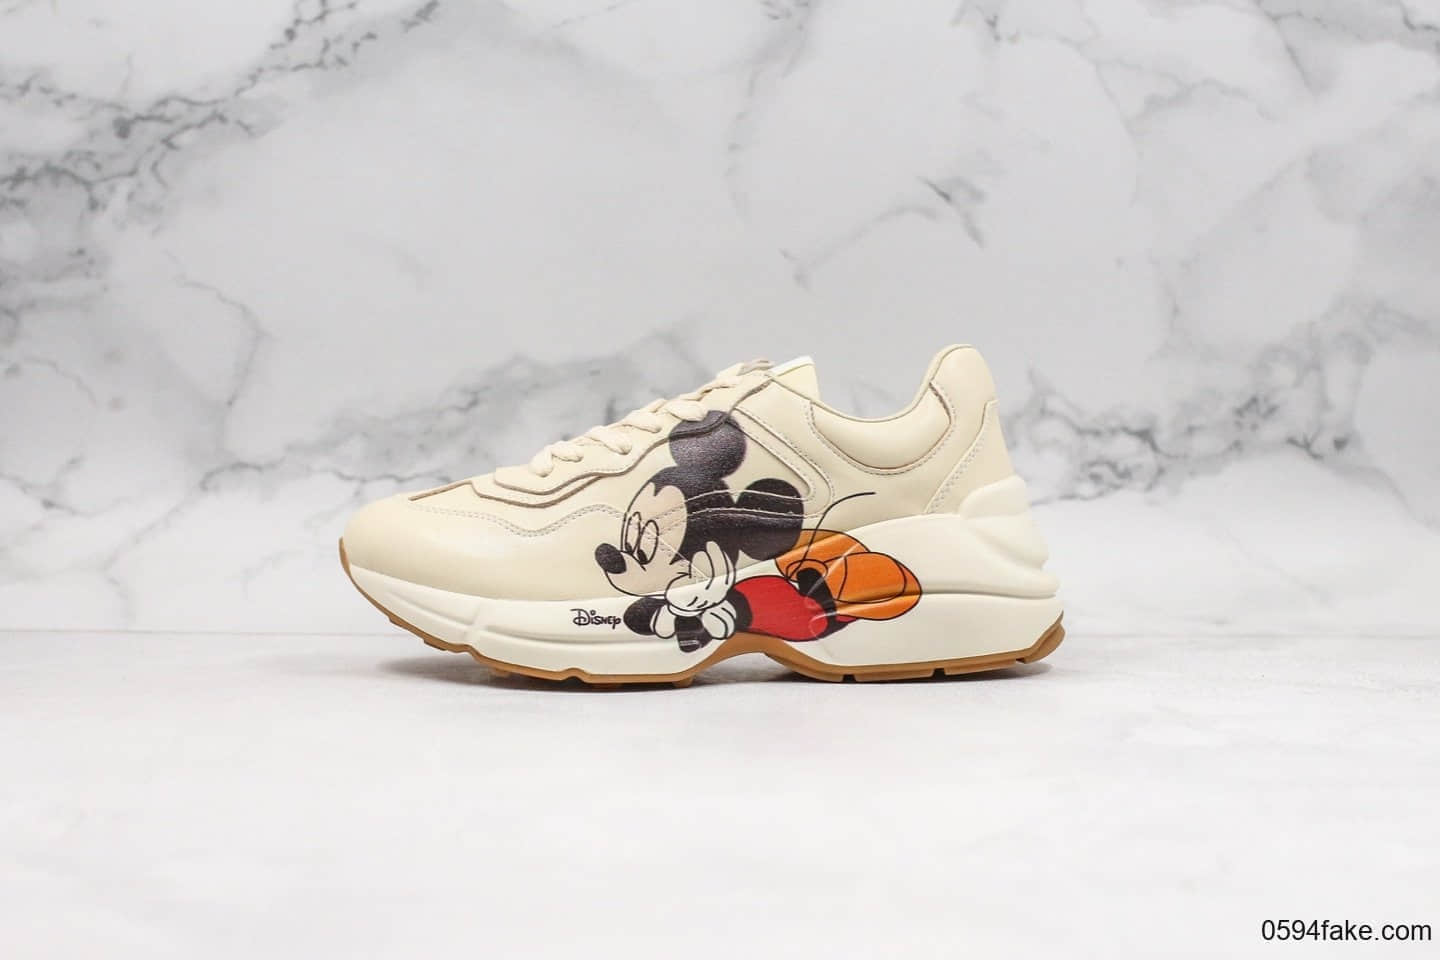 Mickey Mouse Mickey shoes are coming! GUCCI and Mickey Mouse joint father shoes out-of-the-box evalu